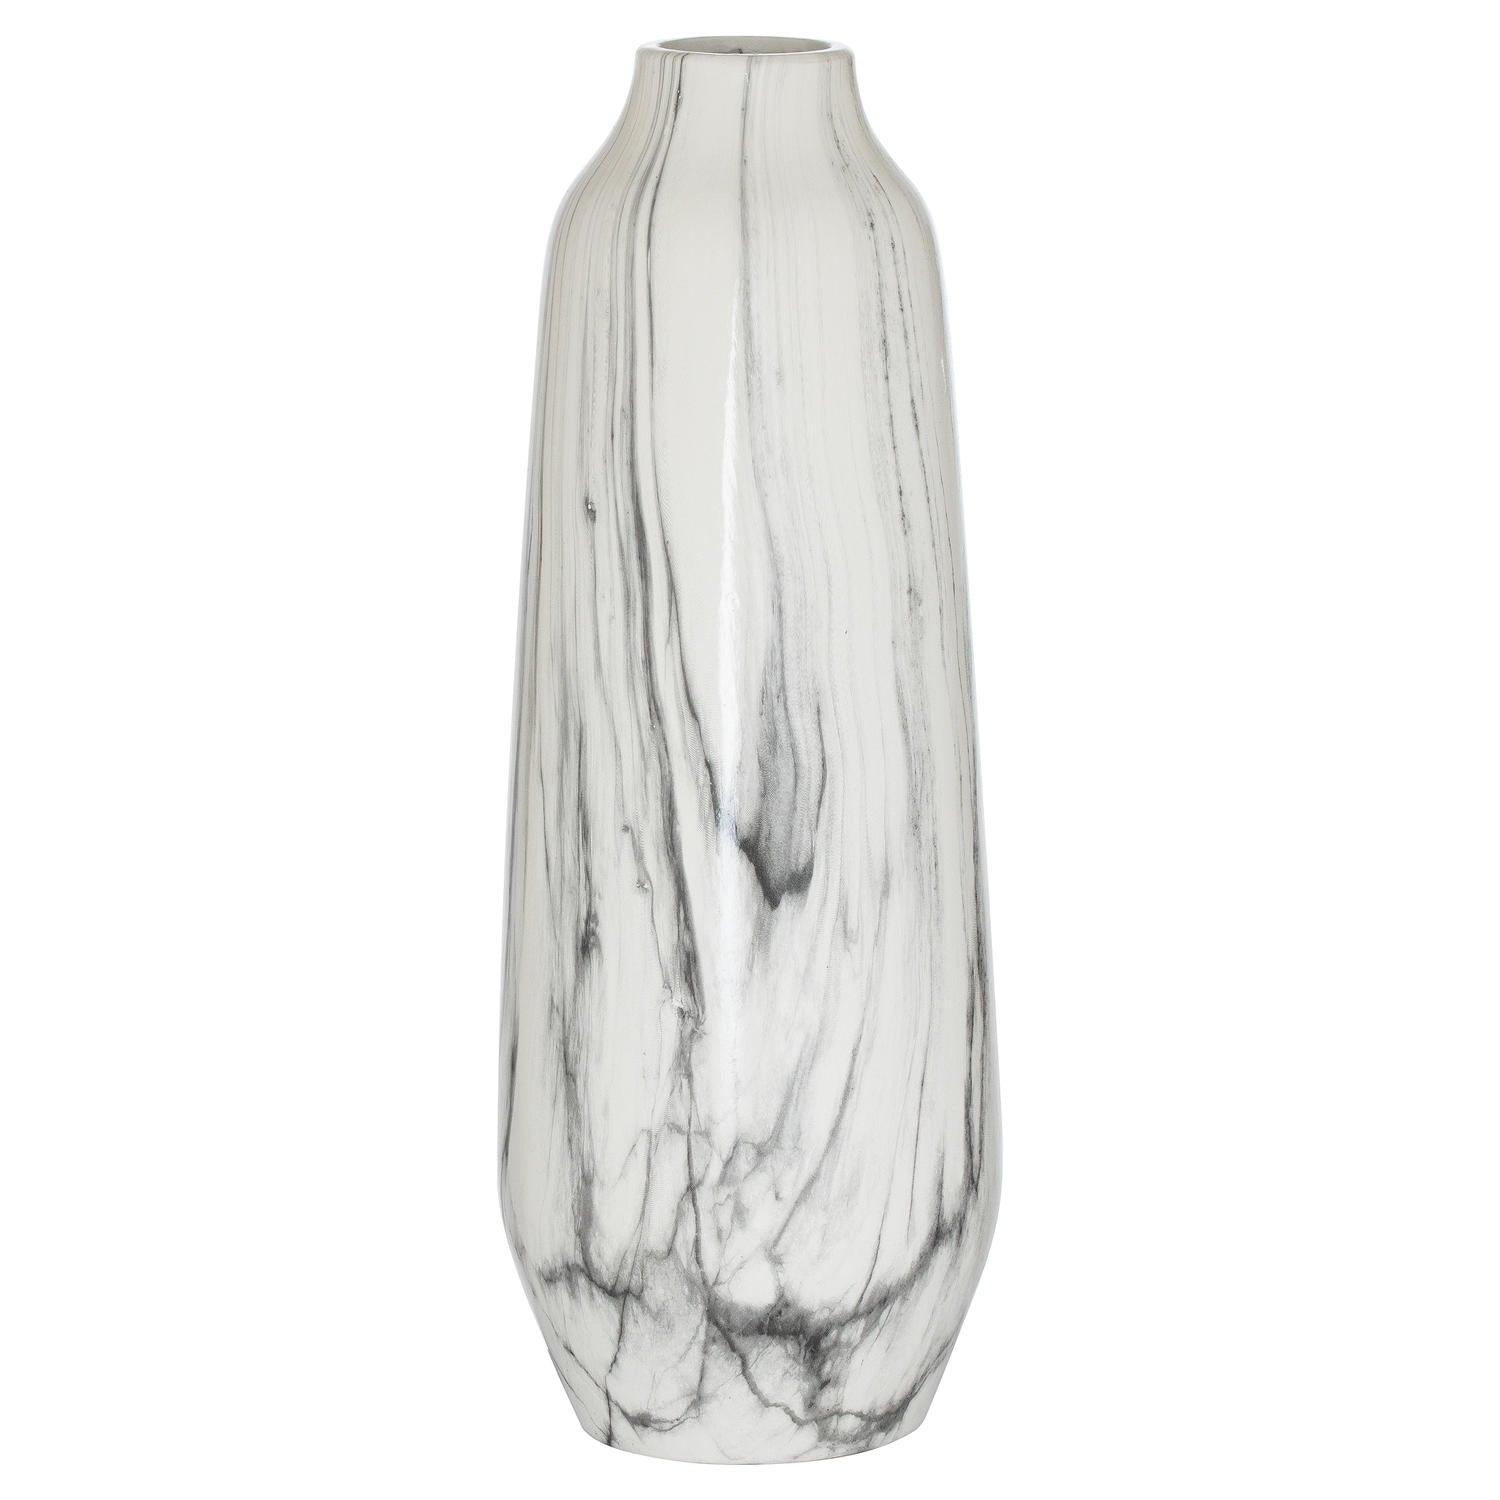 View Marble Olpe Large Tall Vase information